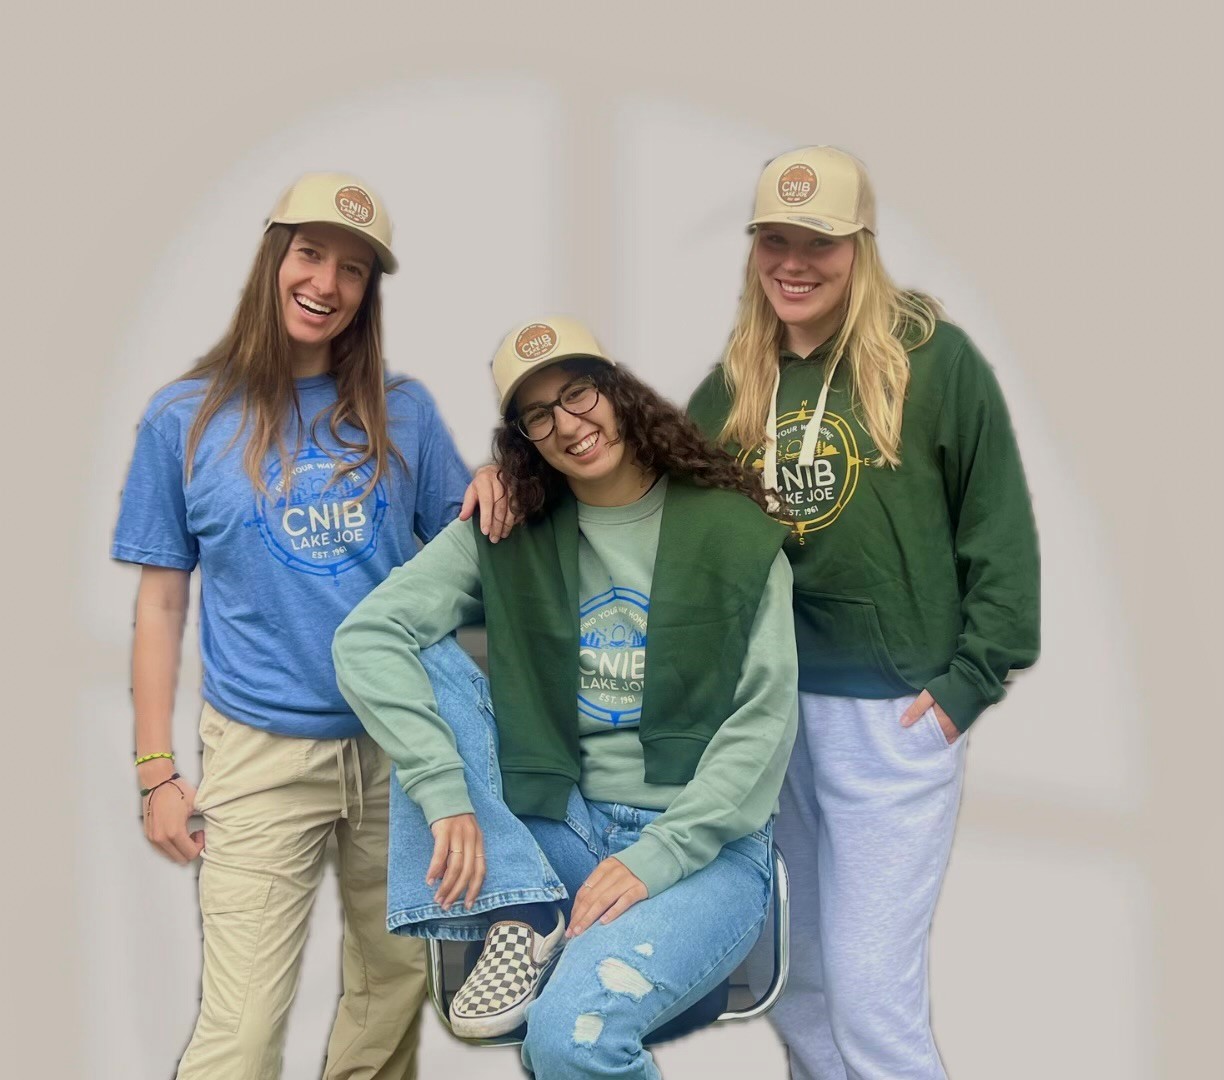 Three young women are posing wearing tan coloured baseball hats with CNIB Lake Joe logo on them, as well as different colour sweatshirts (light blue and mint green) and hoodies (dark green).